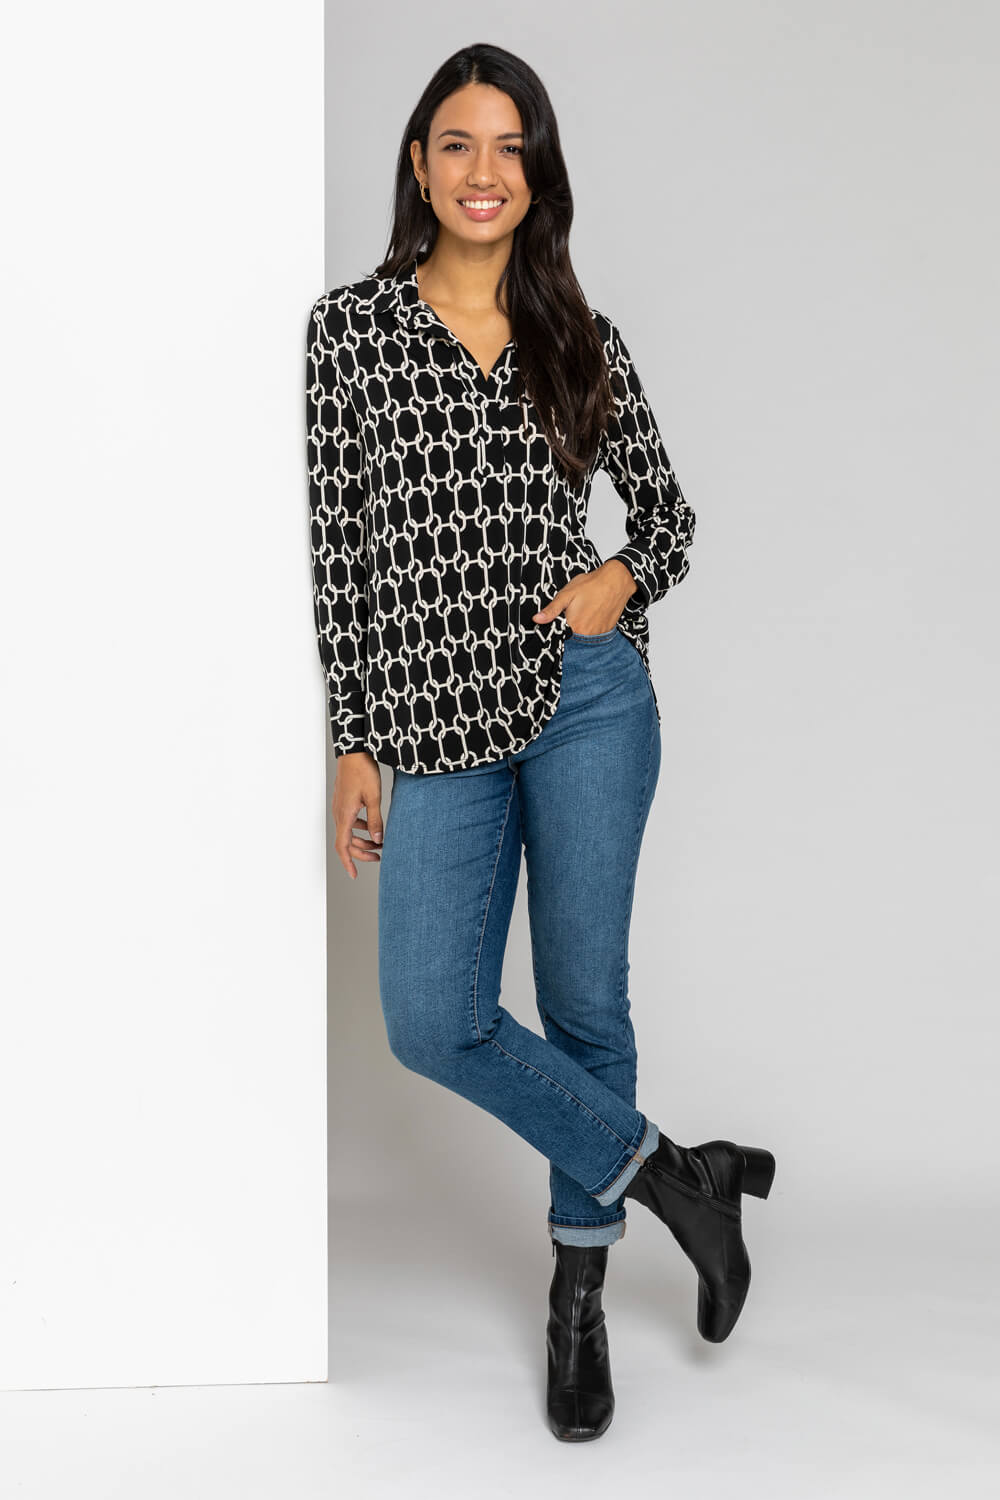 Black Chain Print Long Sleeve Collared Jersey Blouse, Image 3 of 5